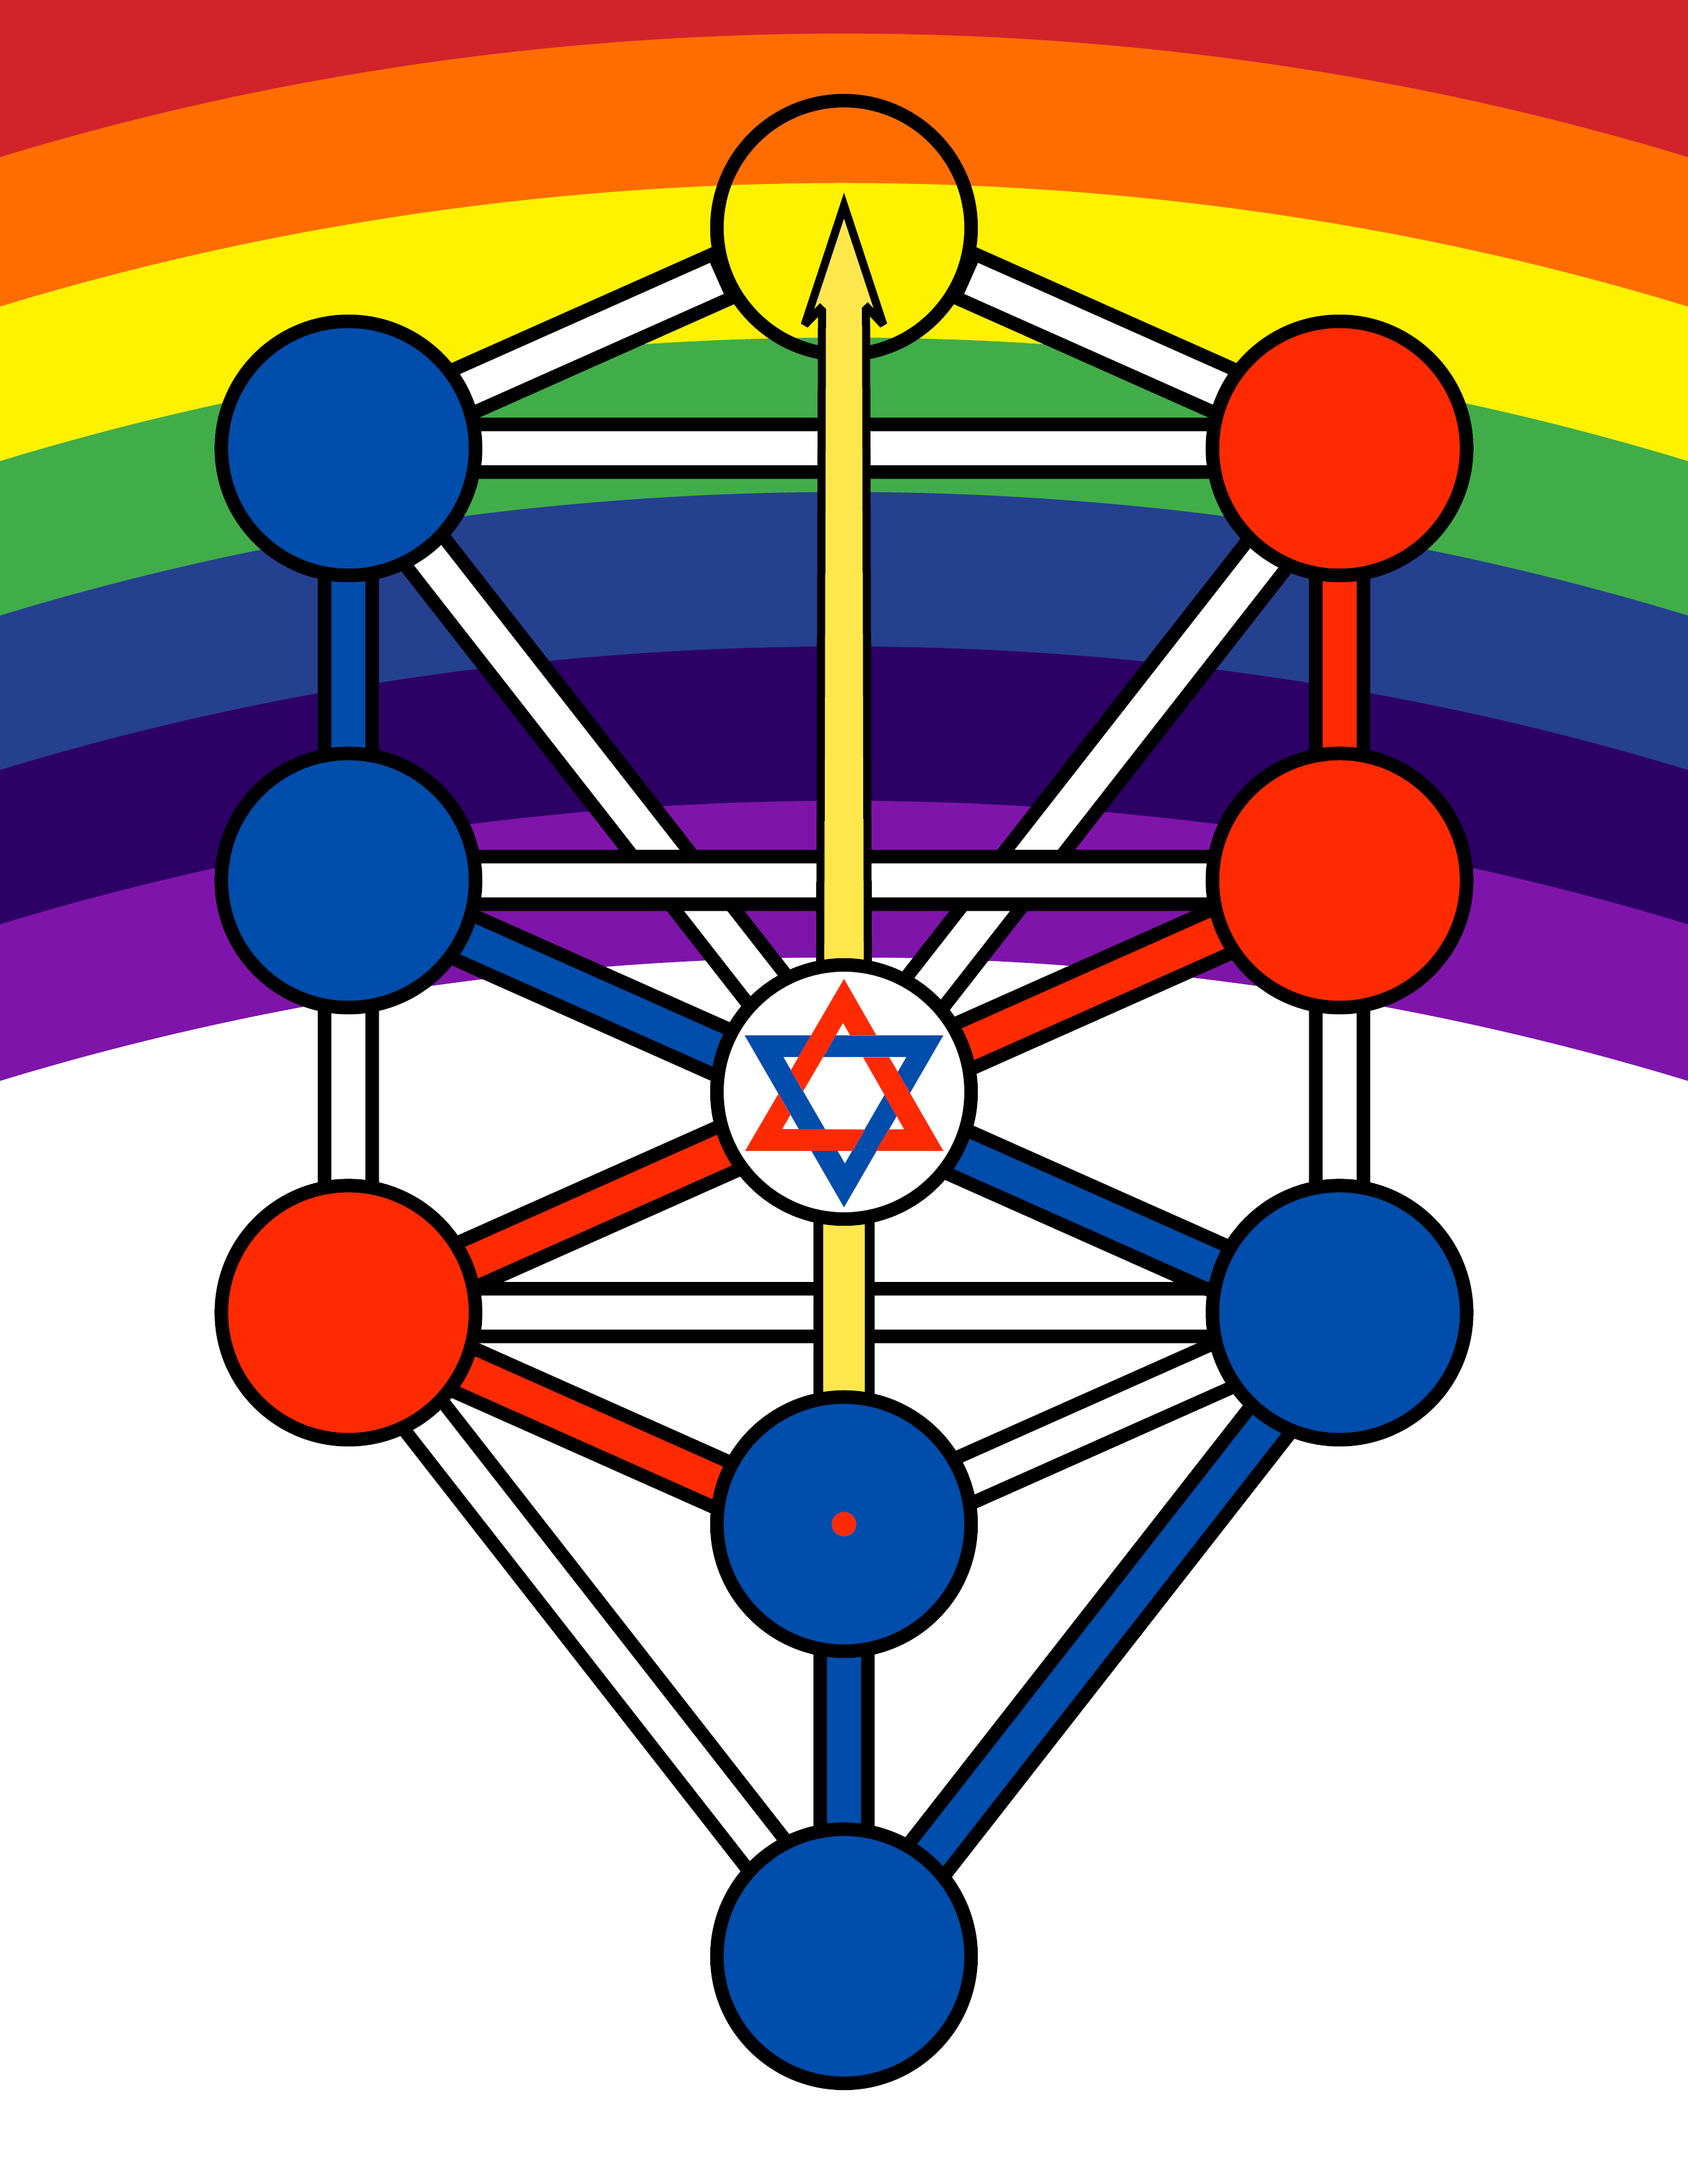 A representation on the Tree of Life of Atu XIV, "Art". This is also a representation of the climax of the Mass. A male current descends from Chokmah to Yesod by means of the male paths, while a feminine current descends from Binah to Malkuth by the feminine paths and then rises into Yesod. A yellow arrow representing air ascends to Kether. Geburah, Binah, Kether, Chokmah, and Chesed are set against a rainbow background.